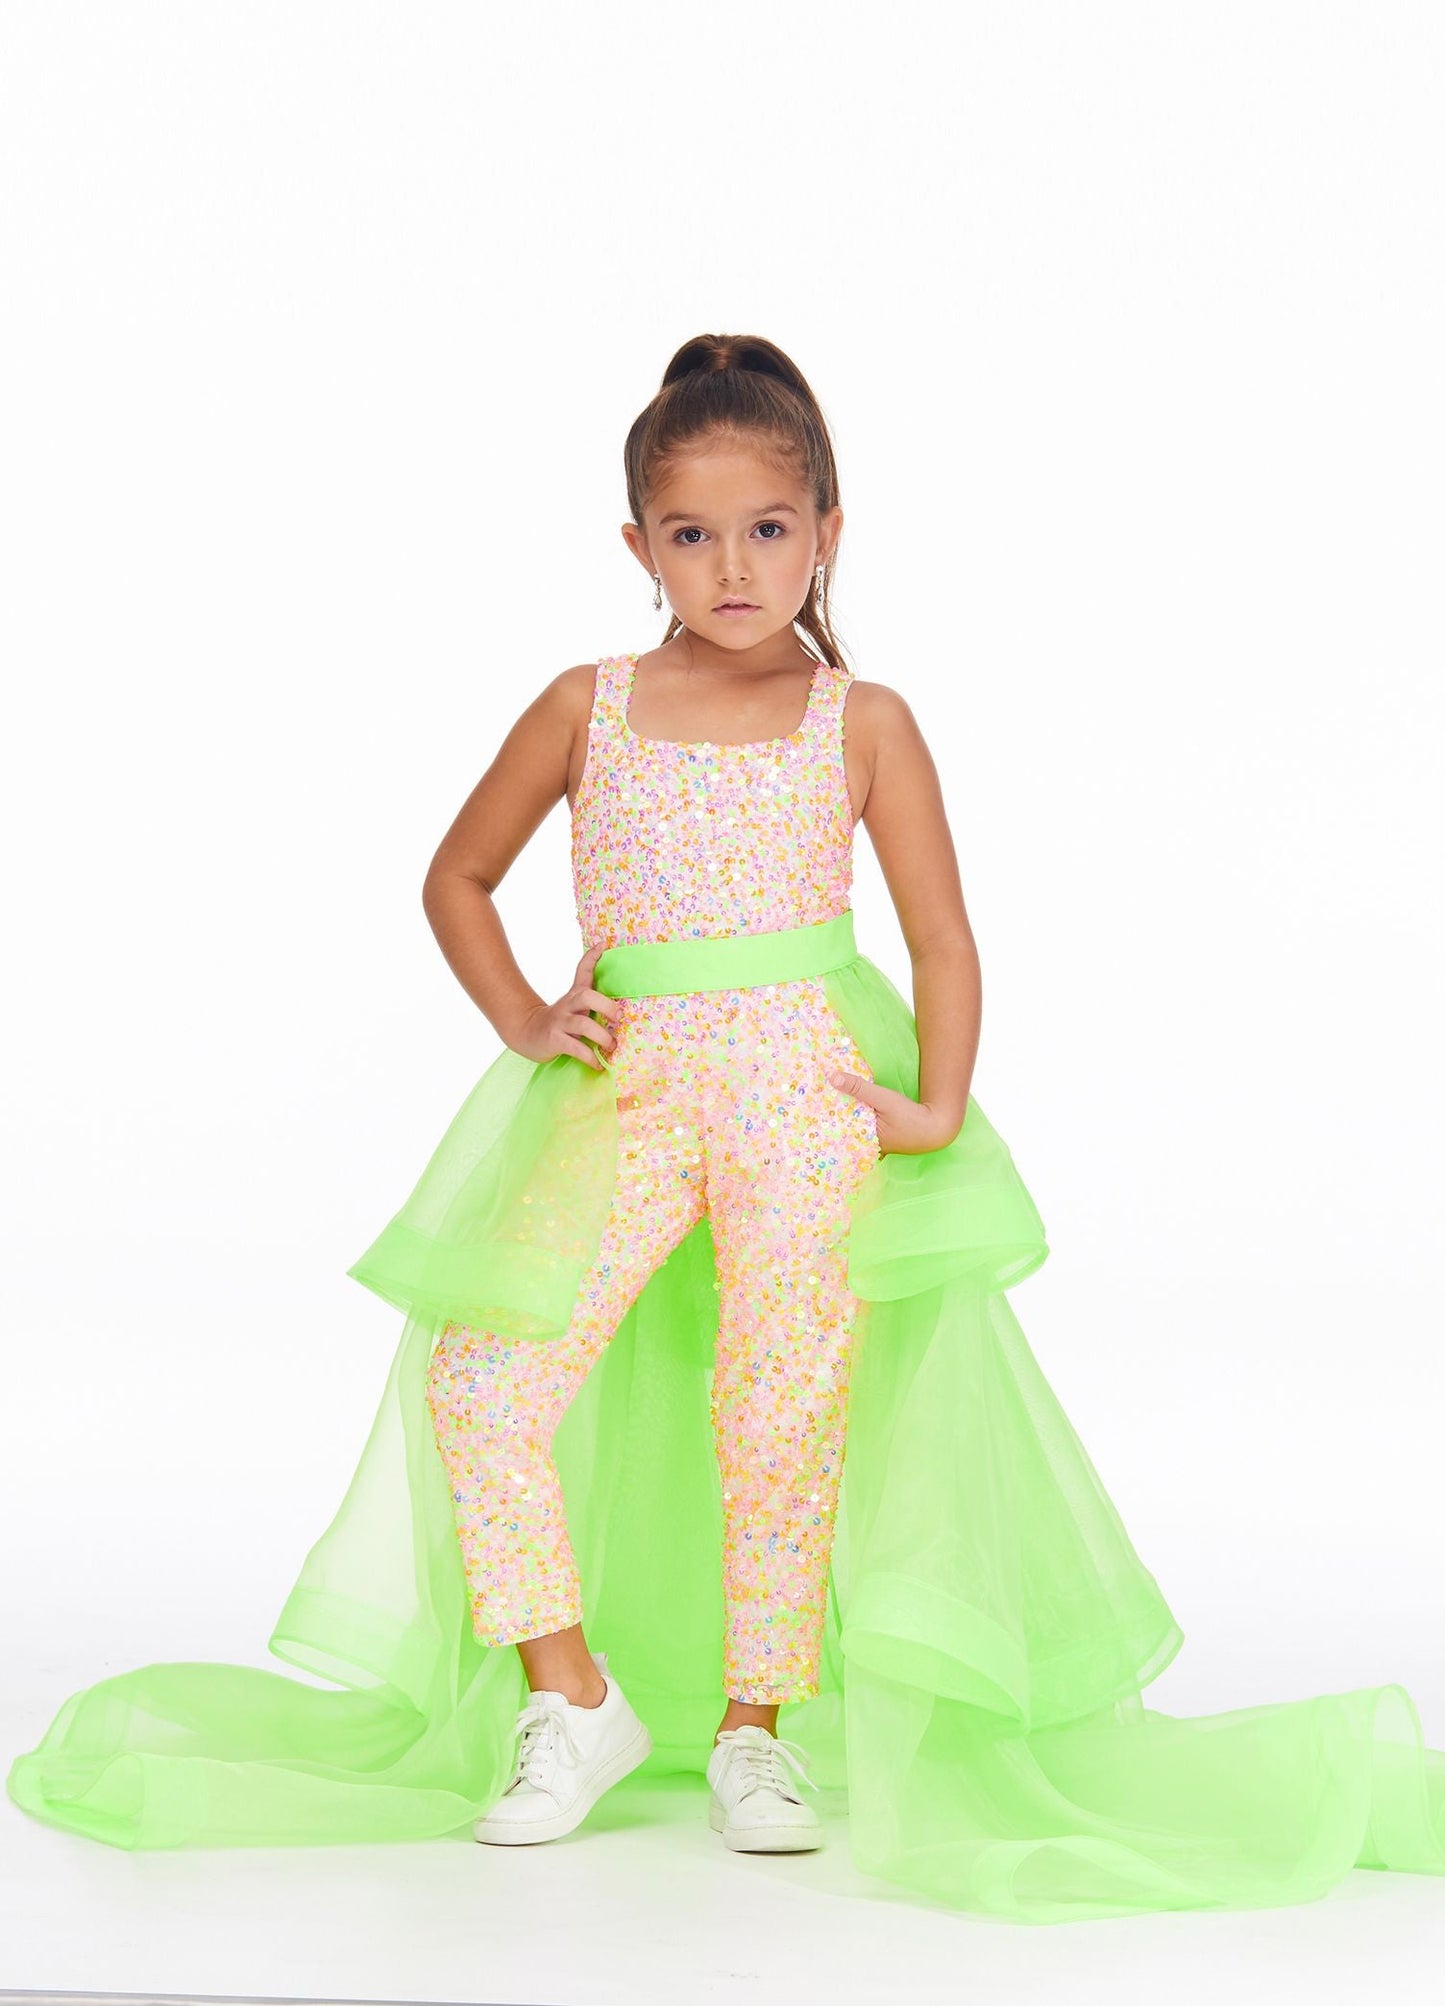 Ashley Lauren 8065 Add a little something extra to your next pageant or special event with an ASHLEYlauren  tiered organza overskirt. The tiers are finished with horsehair.  Colors Neon Green, Hot Pink, Royal, Neon Orange, Black, Fuchsia, Ivory, Red  Sizes 2, 4, 6, 8, 10, 12, 14, 16   Tiered Horsehair Organza Pictured Here with Jumpsuit Style 8048